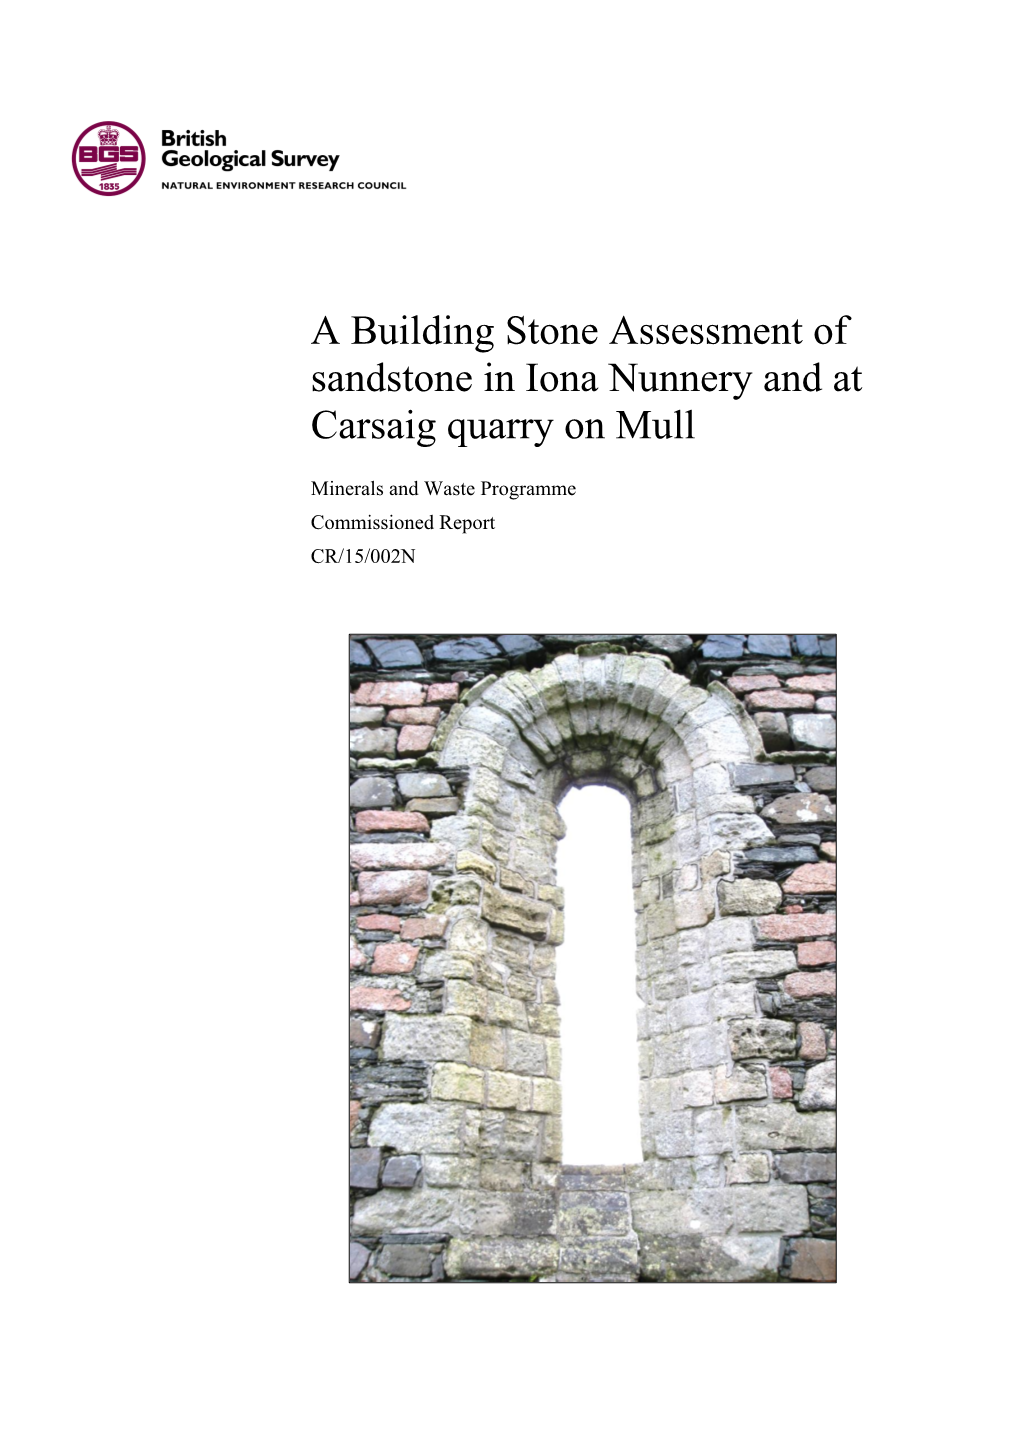 A Building Stone Assessment of Sandstone in Iona Nunnery and at Carsaig Quarry on Mull